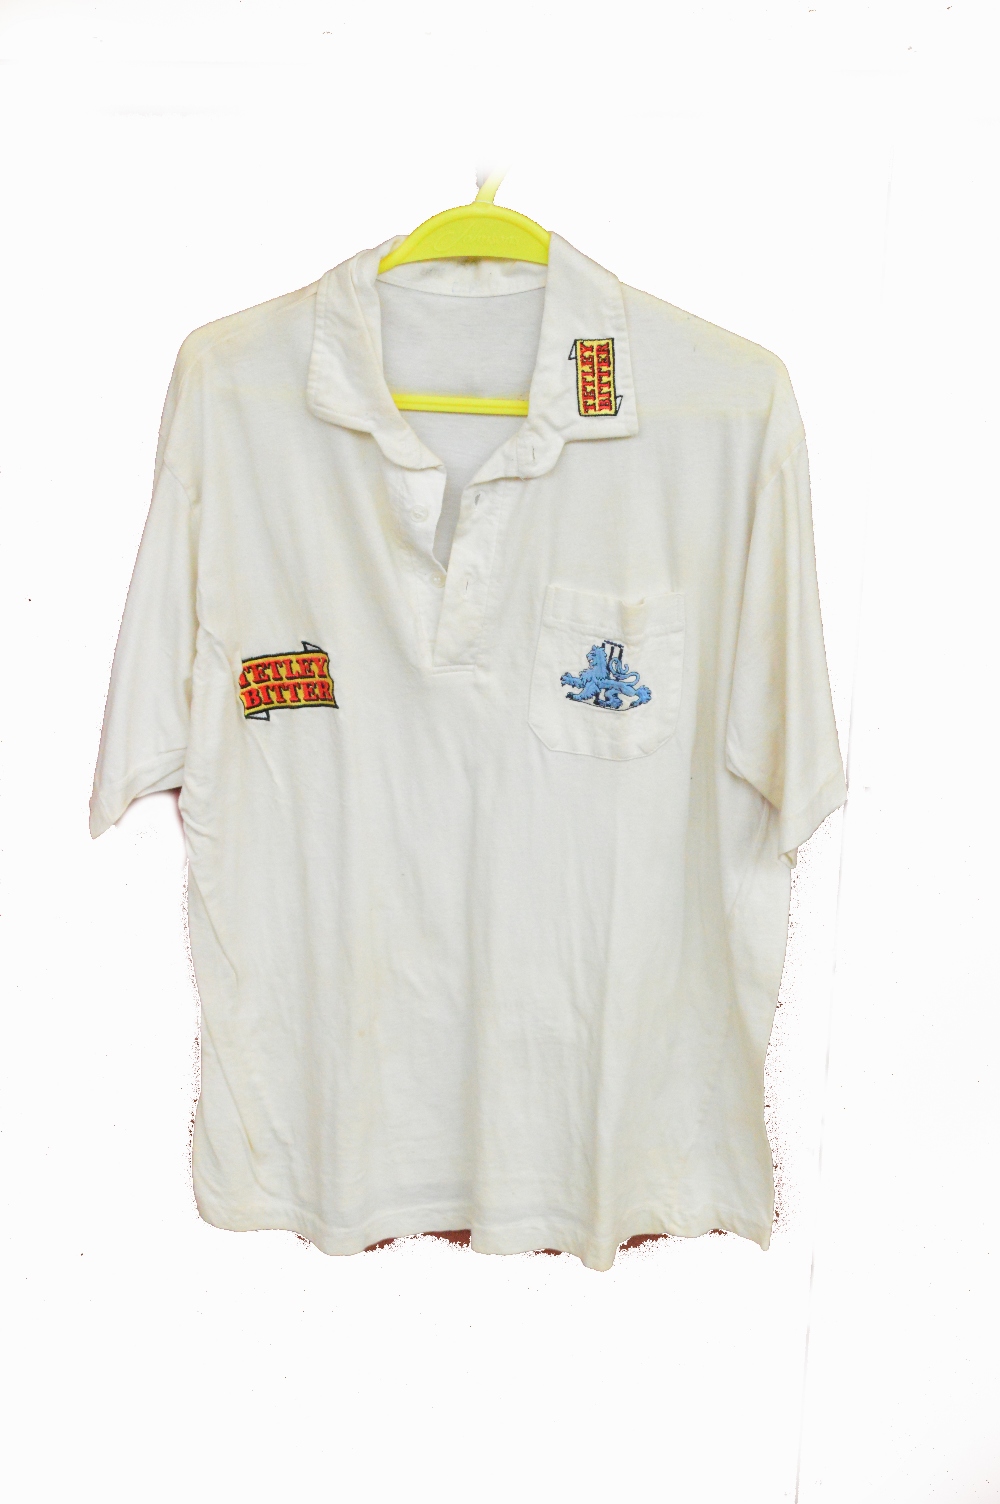 A multi-signed cricket jumper, and a training shirt, both belonging to Dermot Reeve,